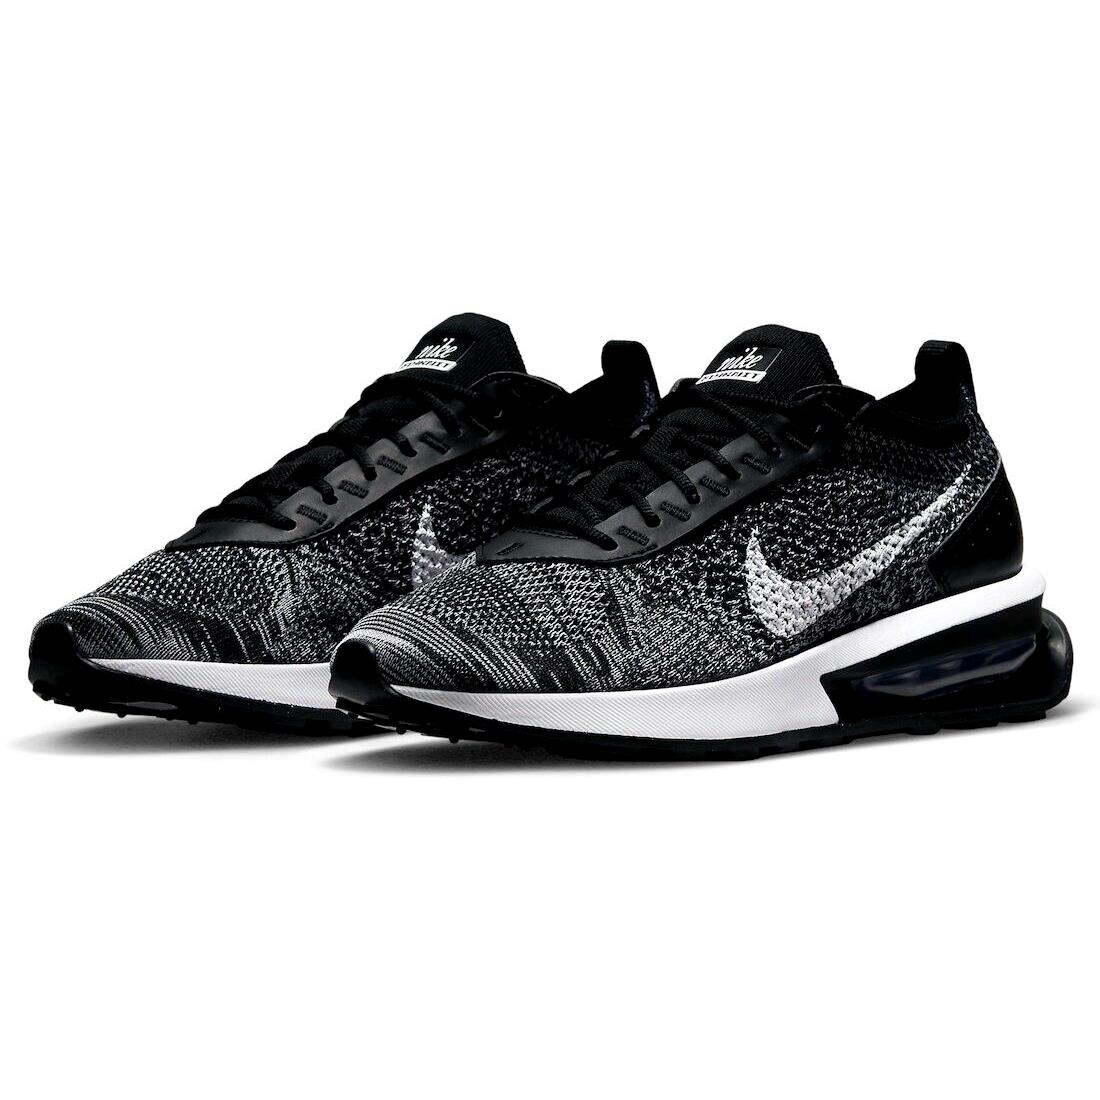 Nike Air Max Flyknit Racer Womens Size 6 Shoes DM9073 001 Black White